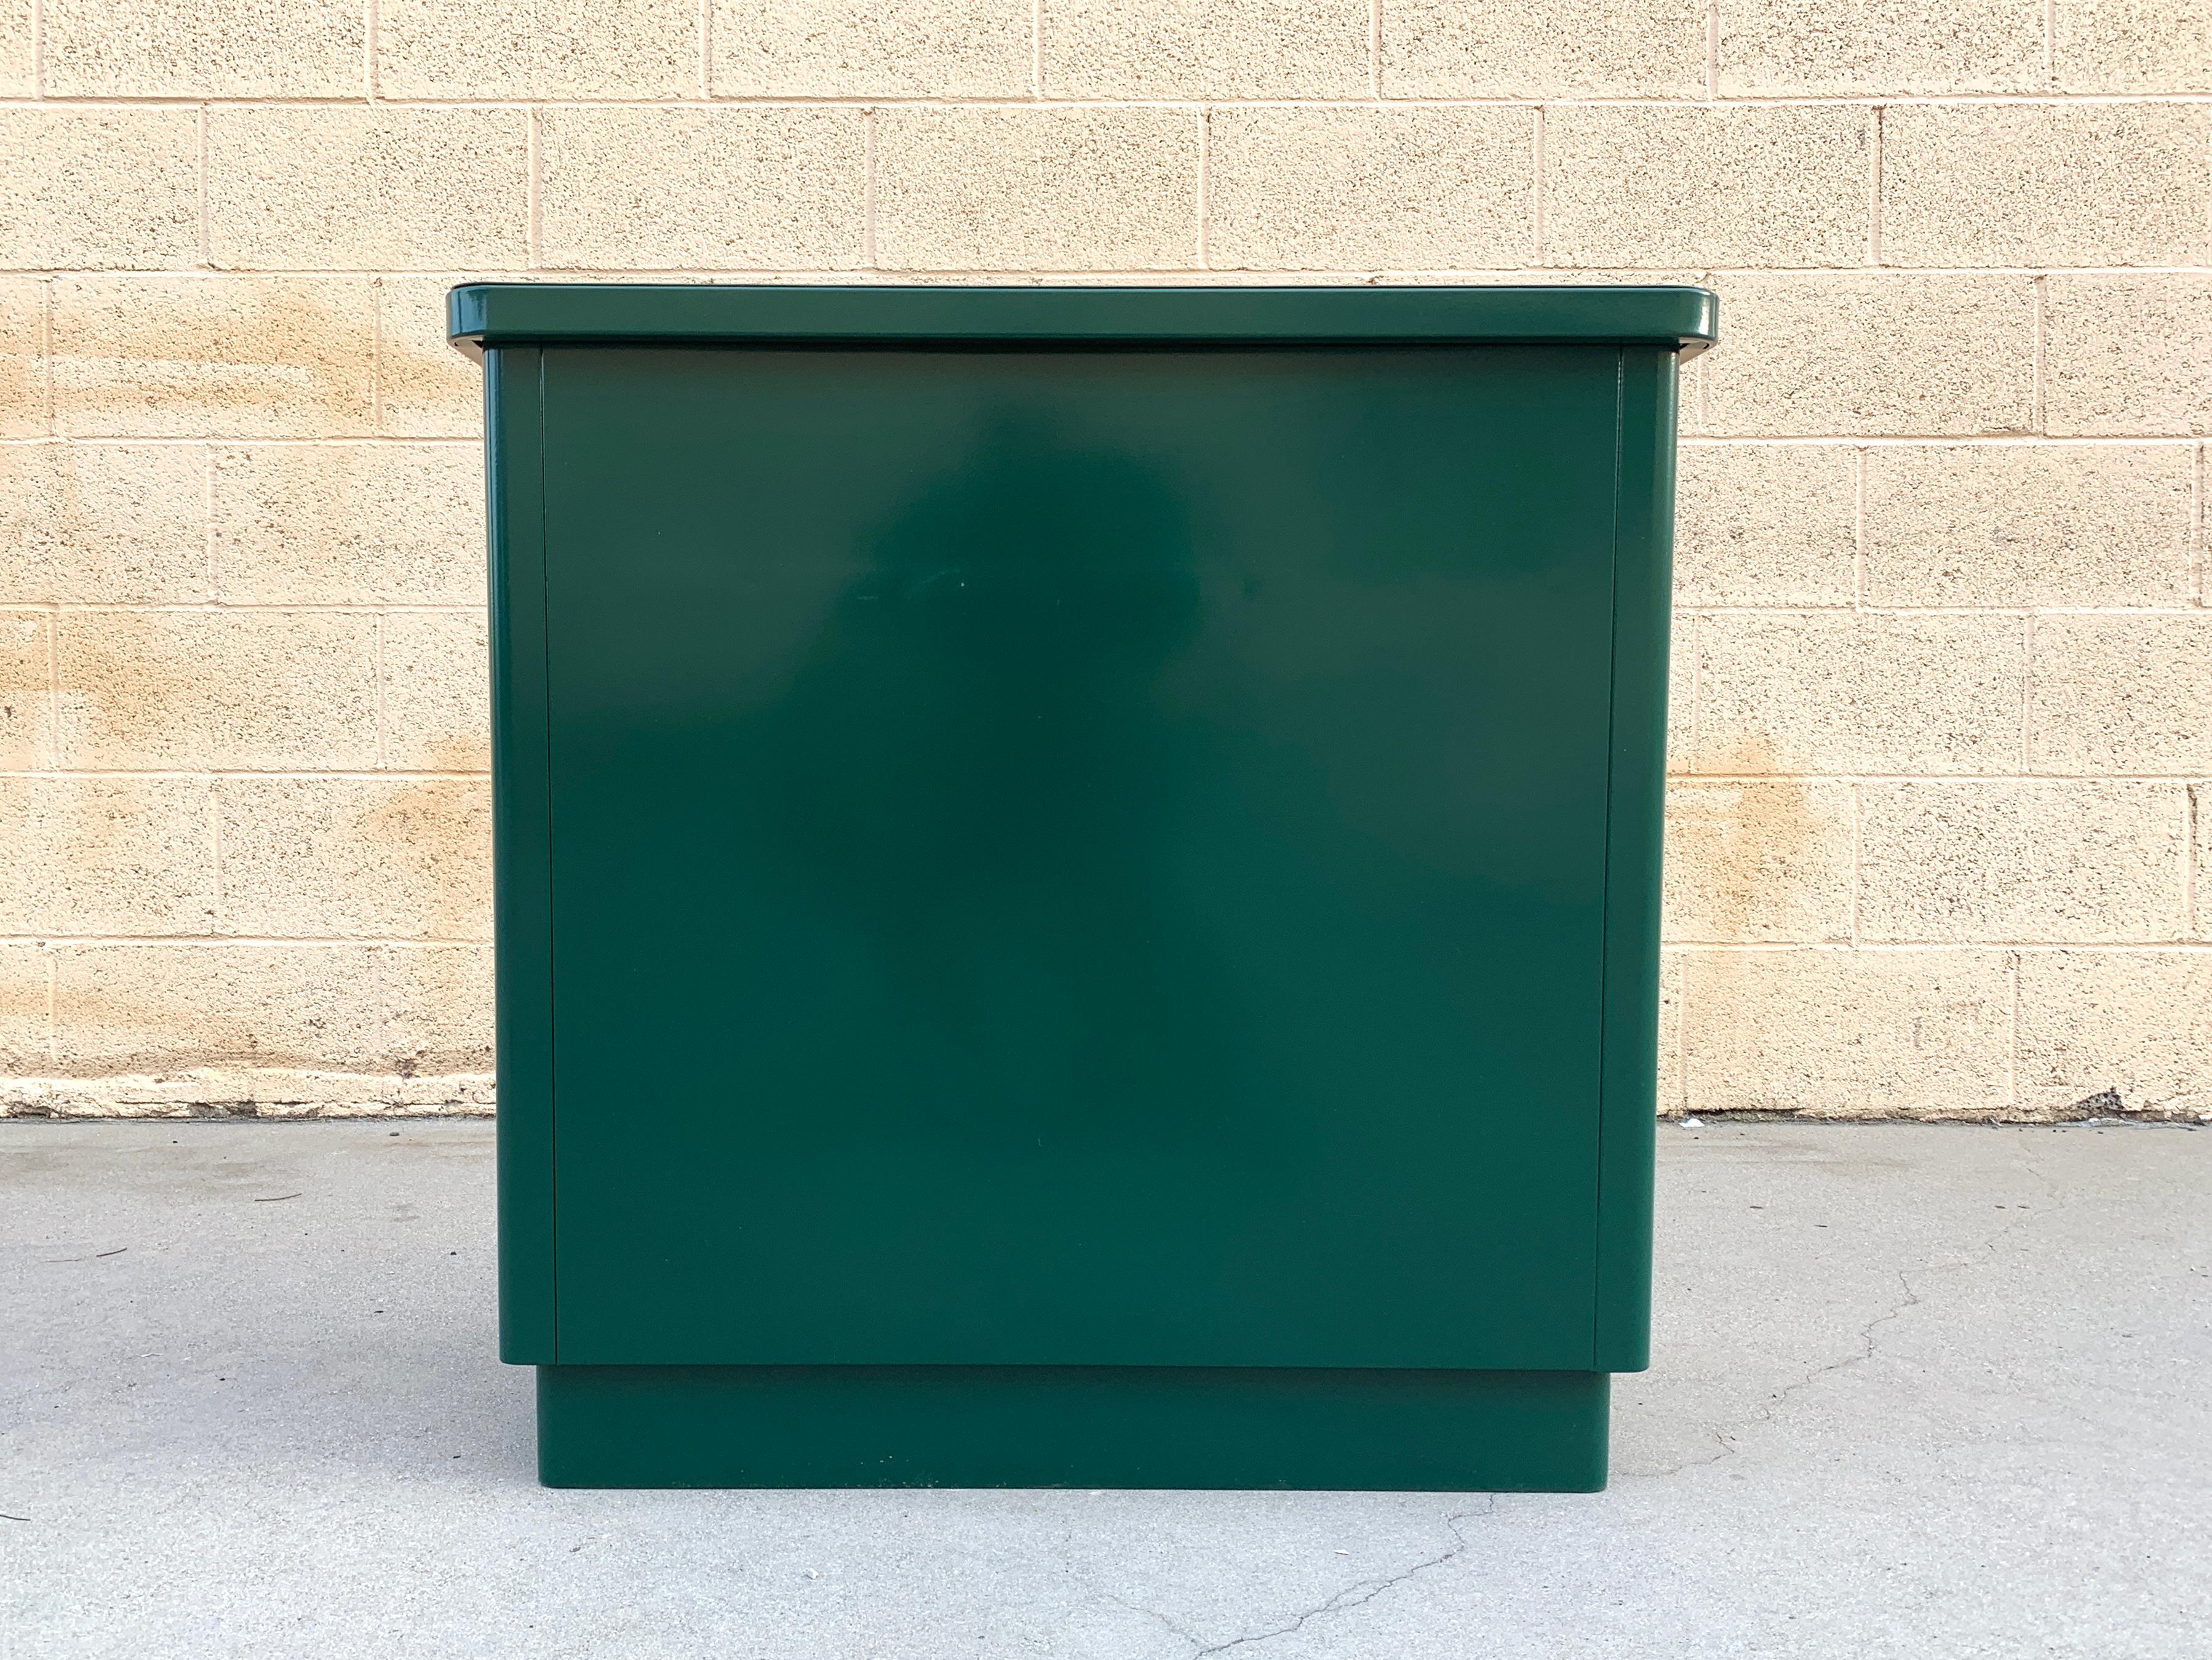 American 1960s McDowell Craig Steel Tanker Office Cabinet Refinished in Forest Green